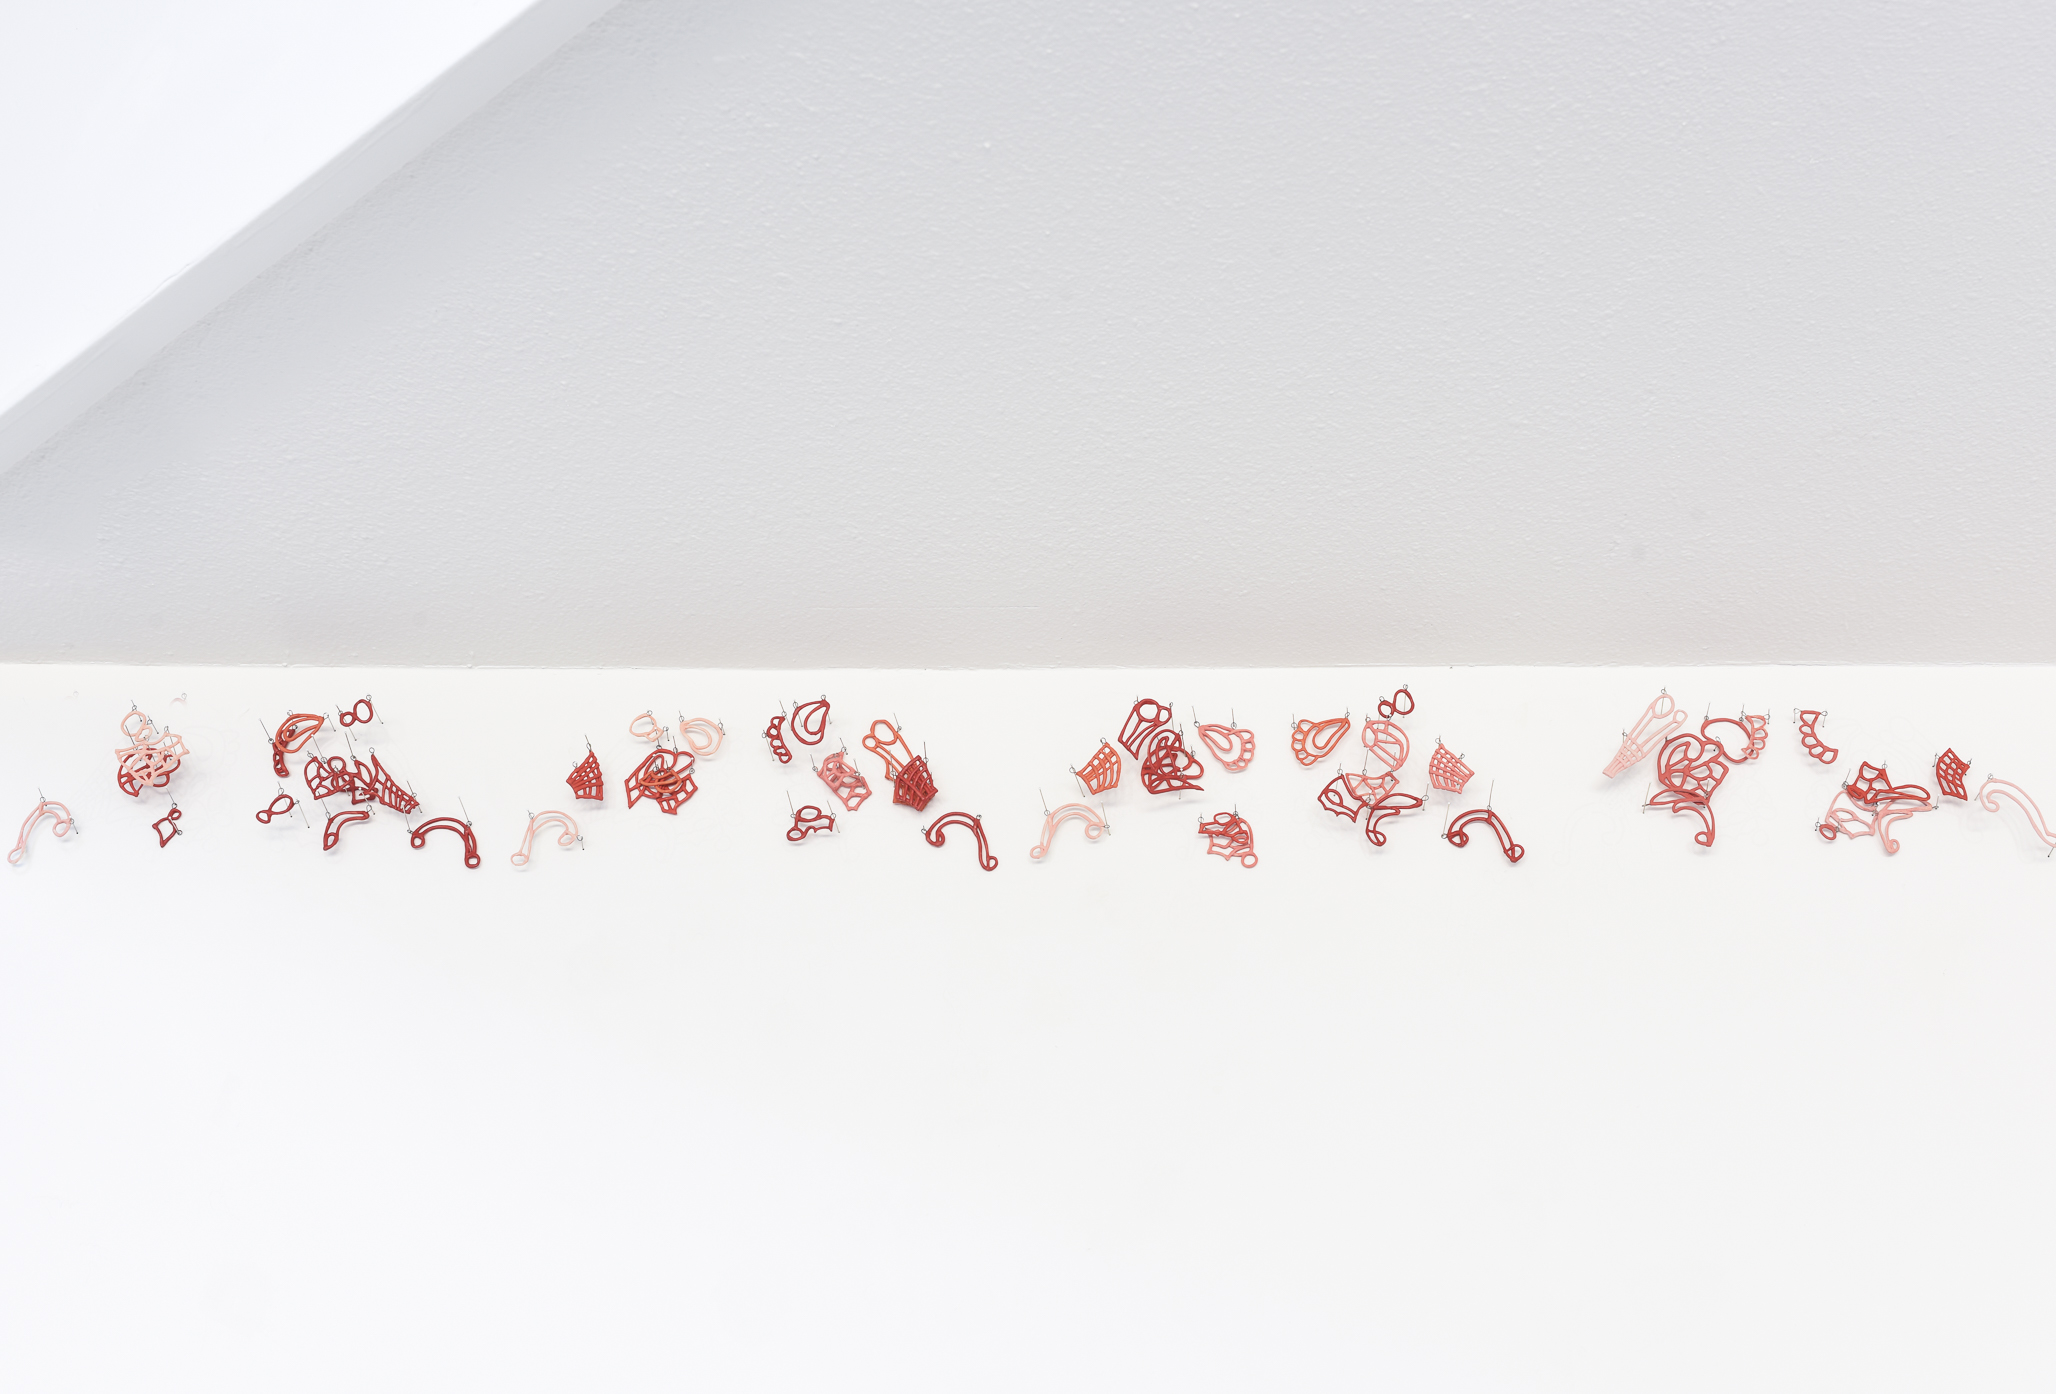 Jeanne Quinn, Pink and Red Porcelain Lace, 2020